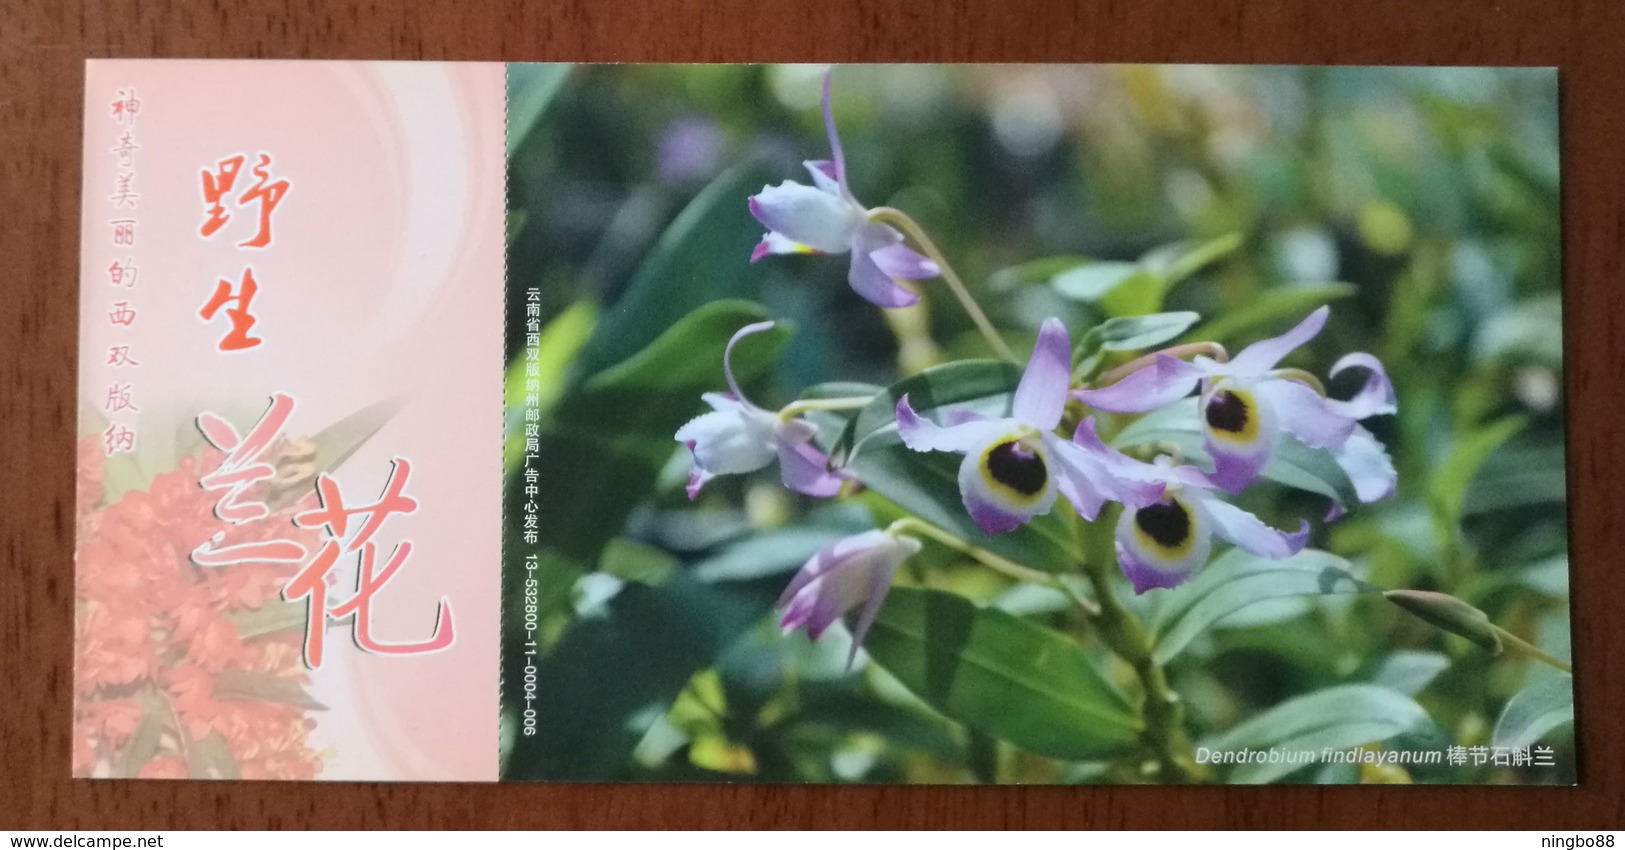 Dendrobium Findlayanum,China 2013 Magical Xishuangbanna Wild Orchid Advertising Pre-stamped Card,specimen Overprint - Orchids